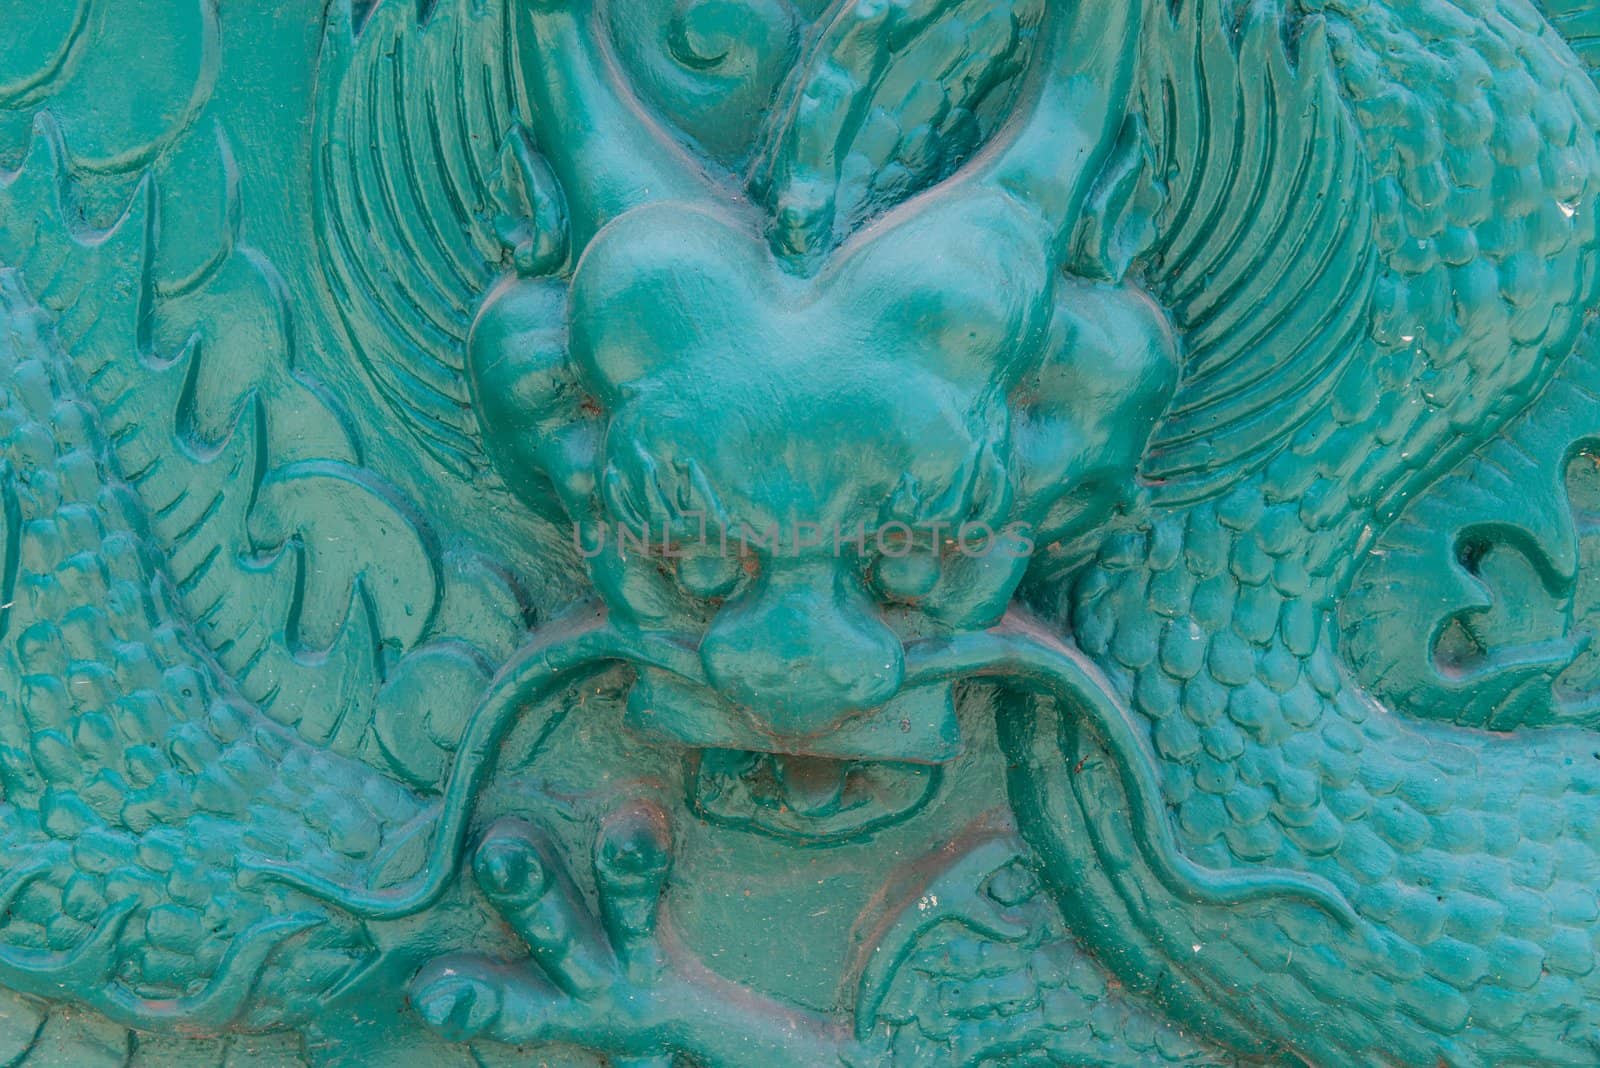 Large dragon sculpture symbolized wealth and power by sasilsolutions